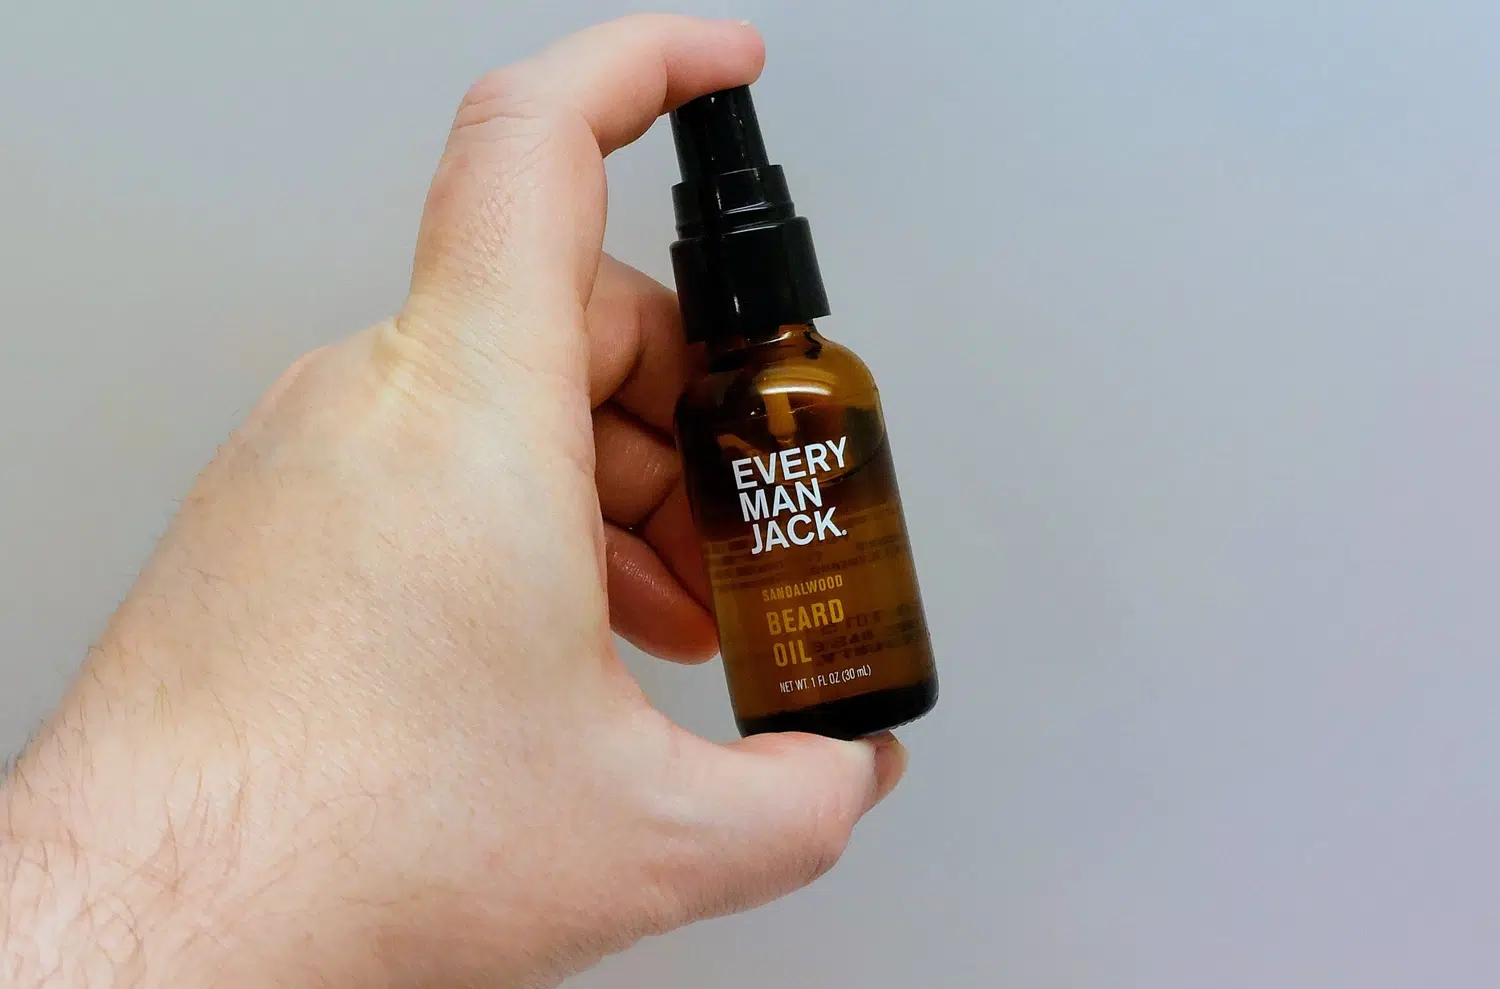 holding a bottle of Every Man Jack Beard Oil bottle between fingers to show how it looks